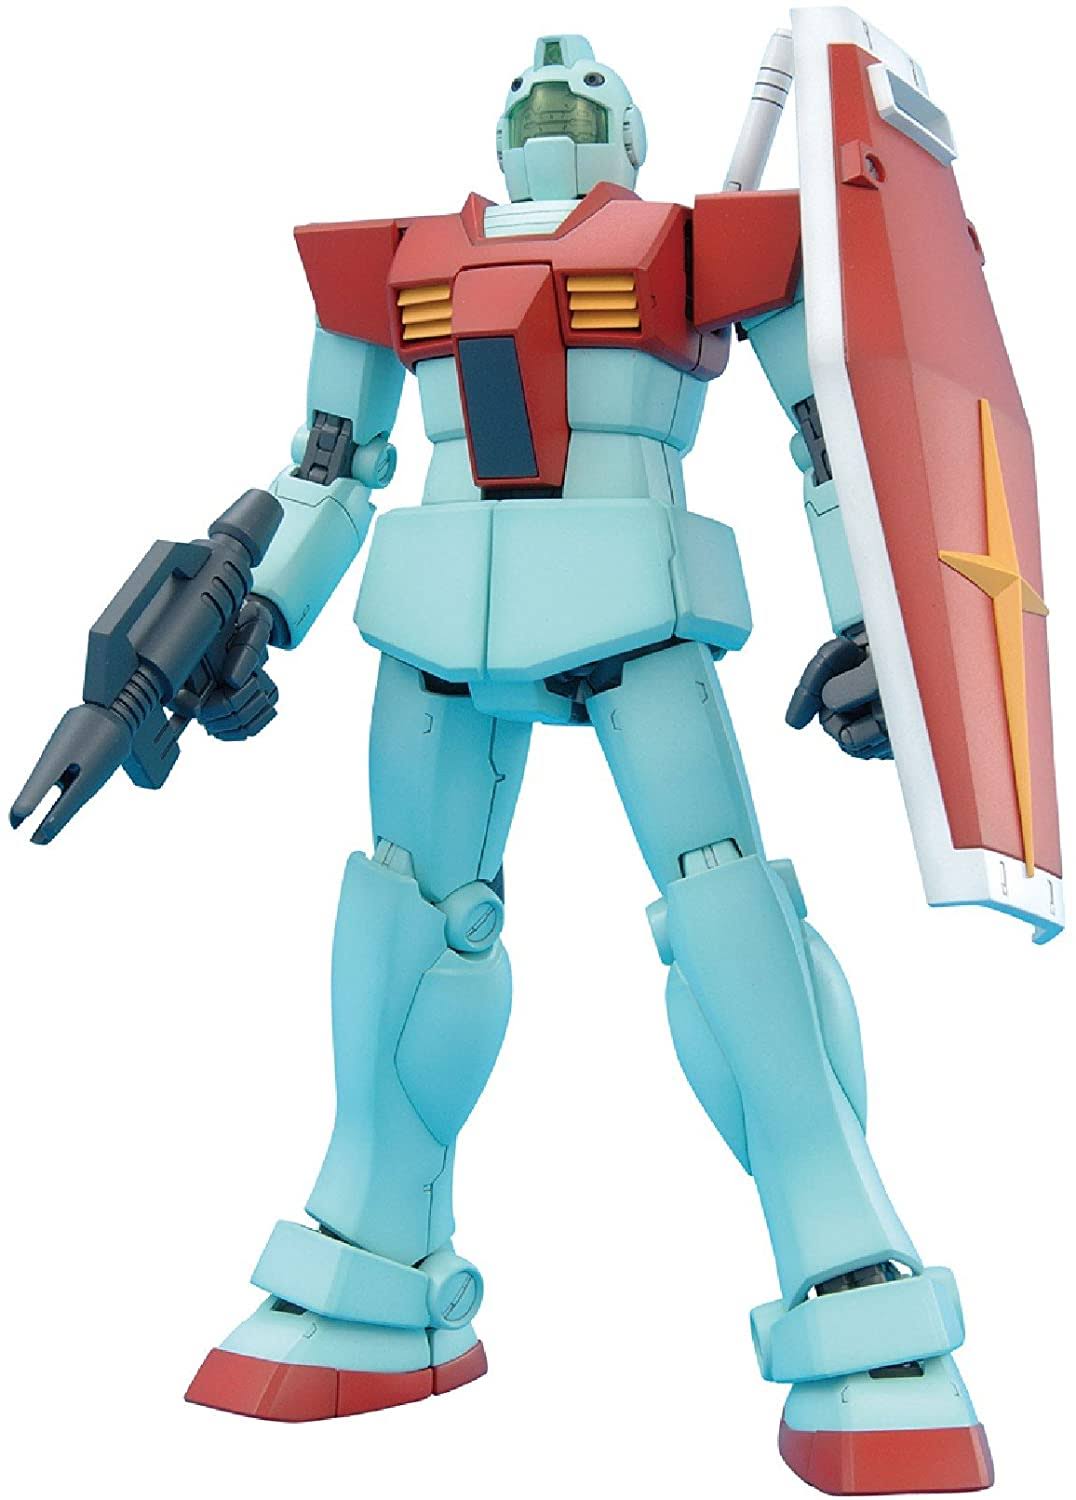 MG Mobile Suit Gundam RGM-79 GM Ver.2.0 1/100 Scale Color-coded Plastic Model